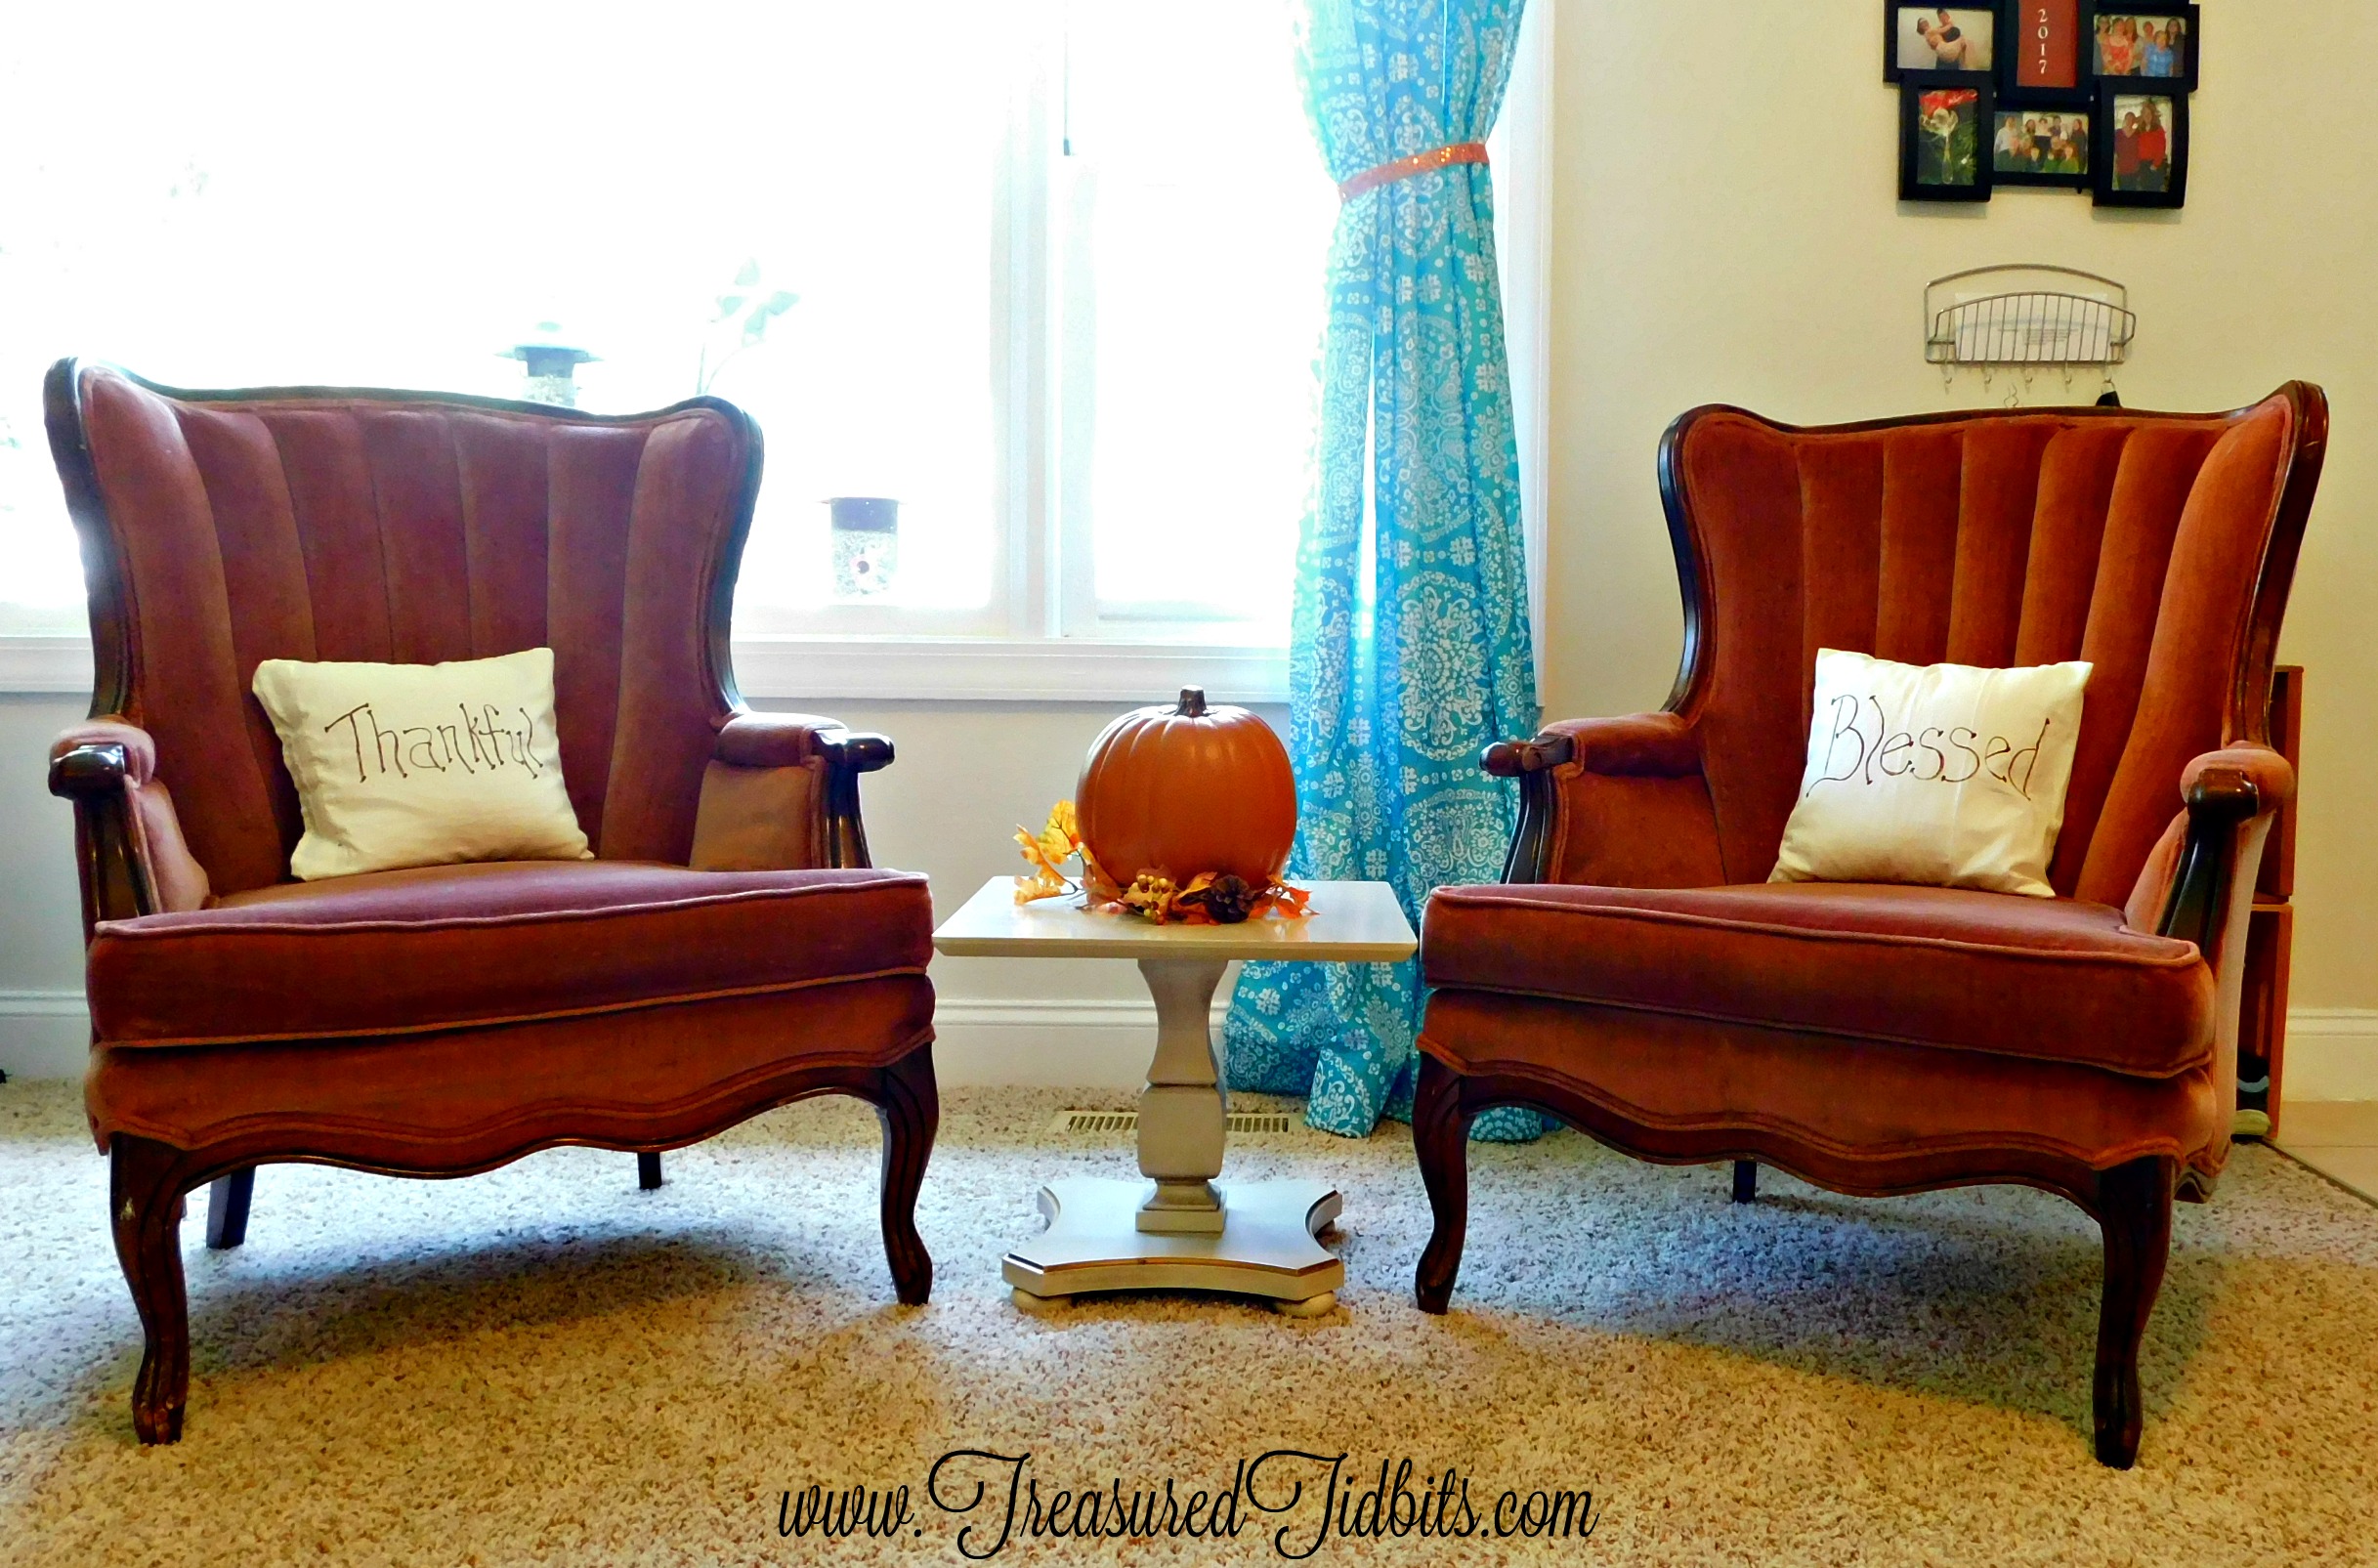 Fall Tour House on the Hill Entrance Seating Grateful & Blessed Pillows with Pumpkin